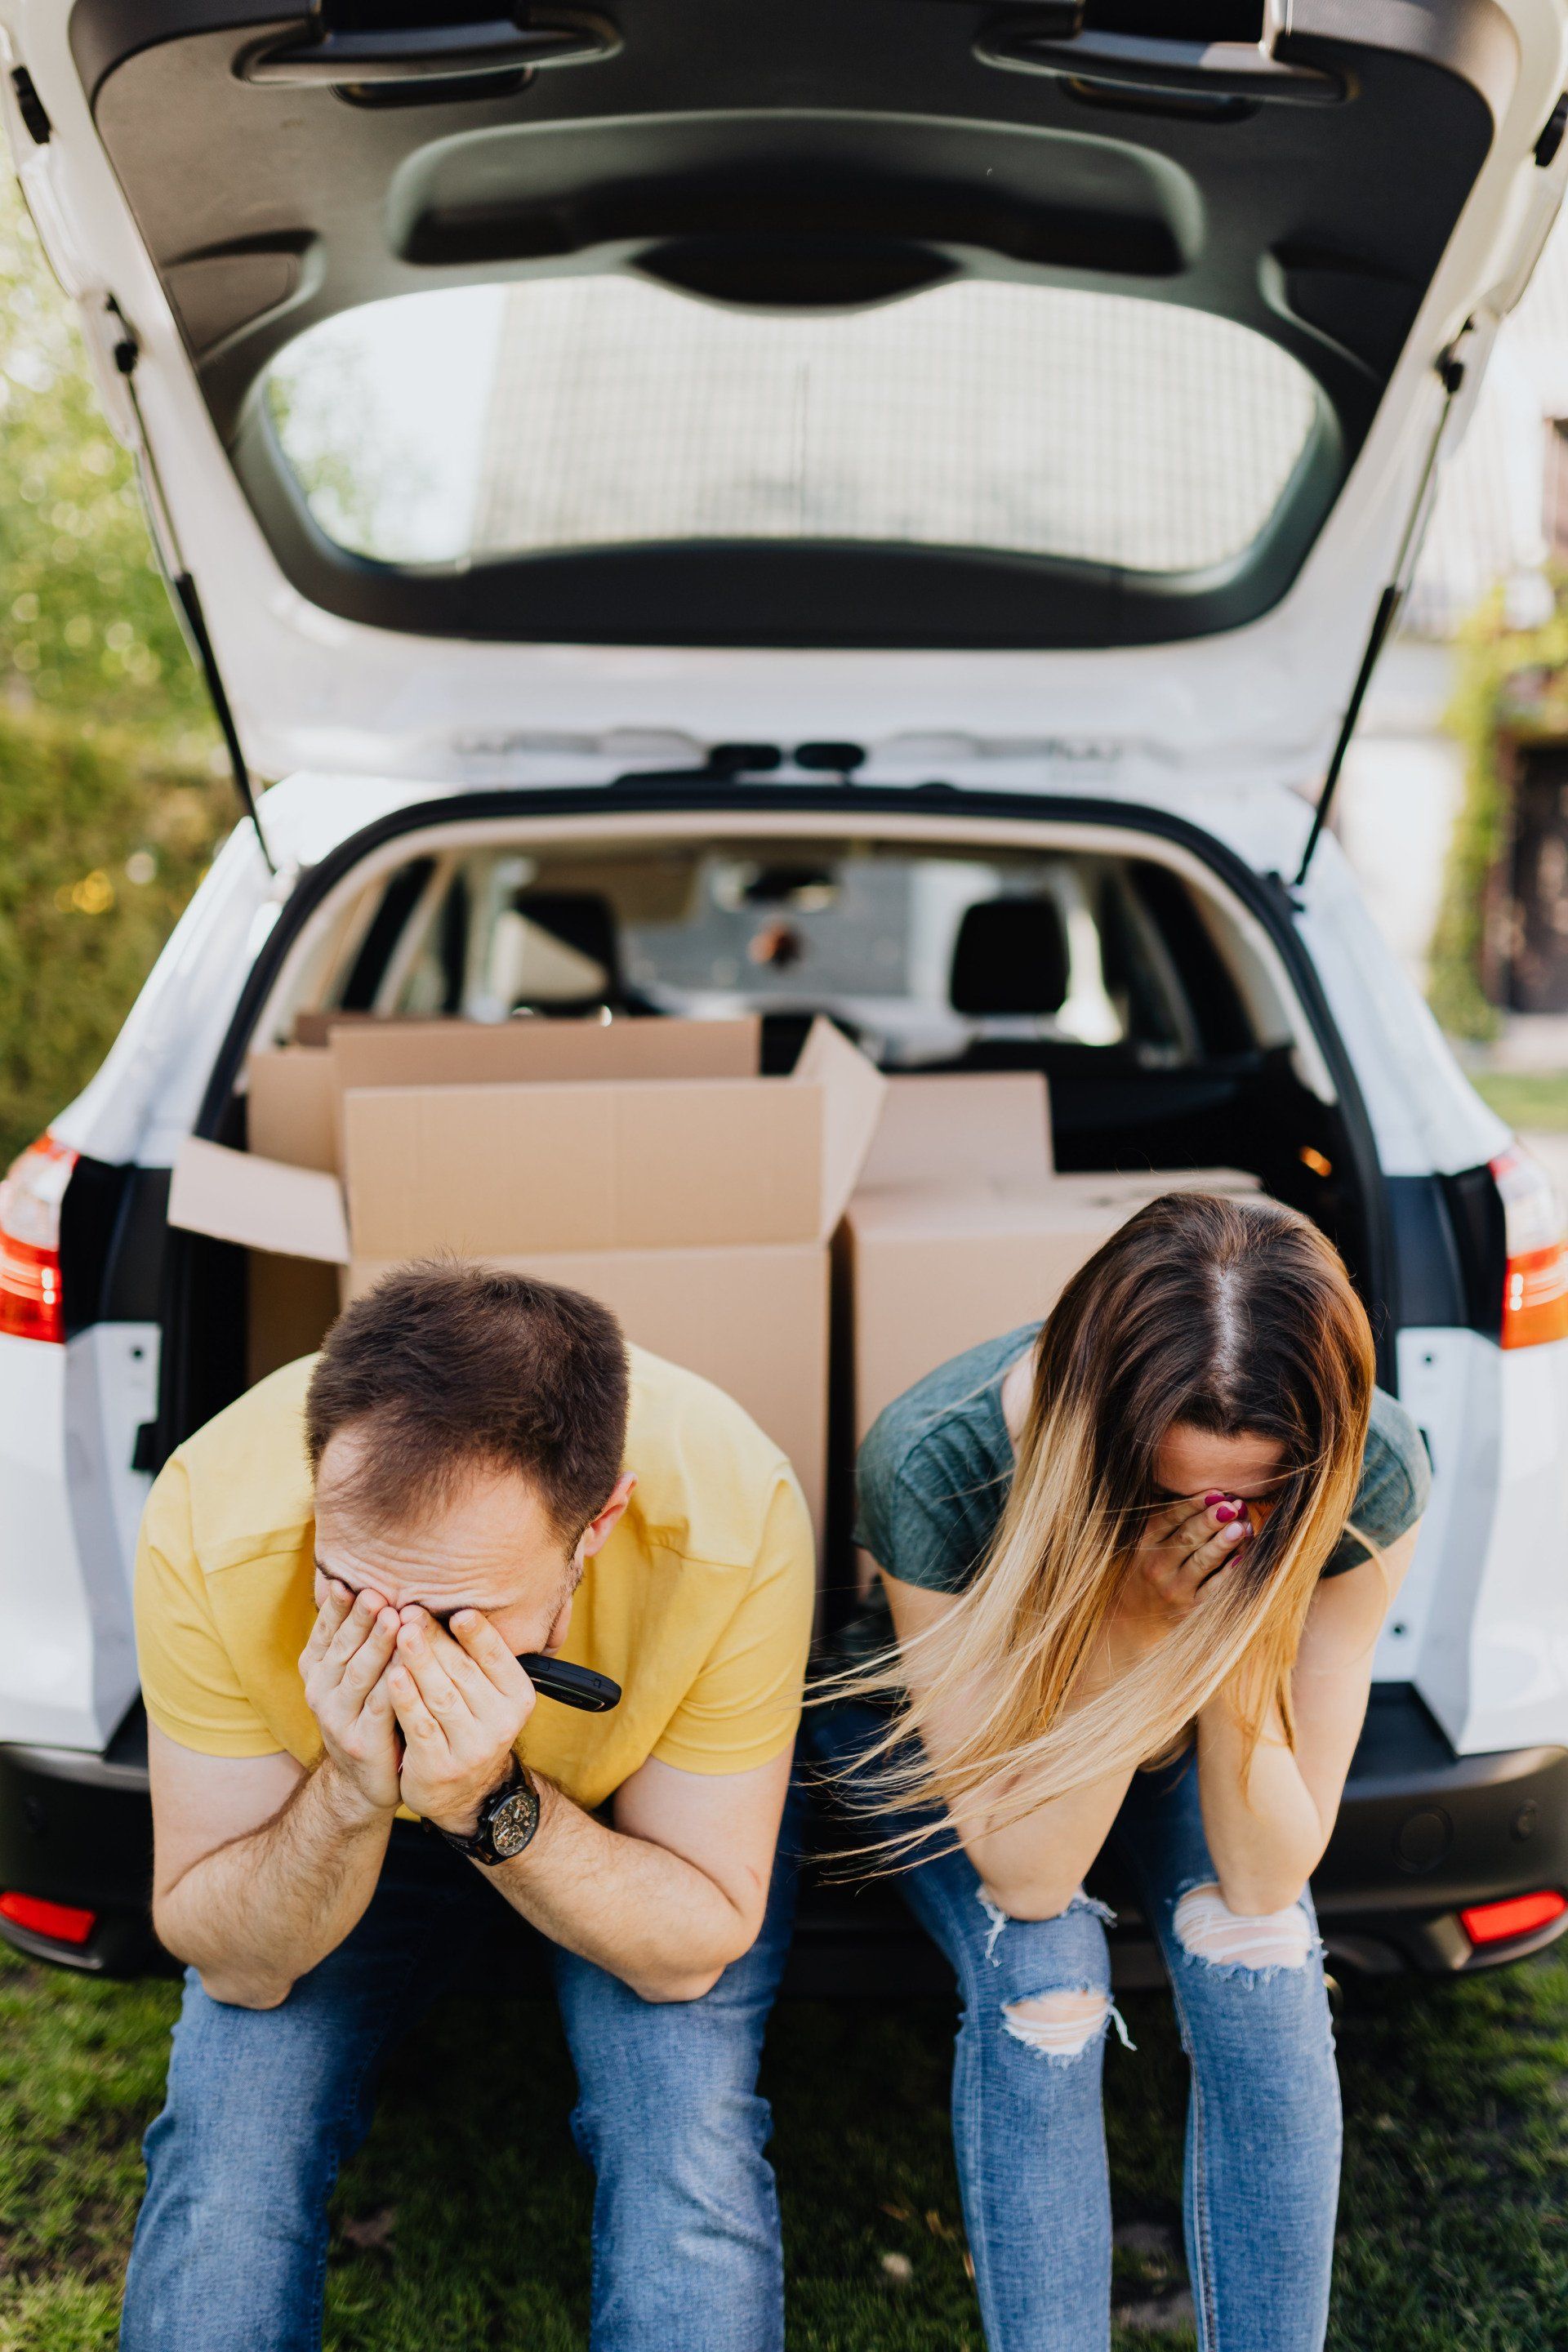 A man and a woman are sitting in the back of a car with boxes in the trunk.